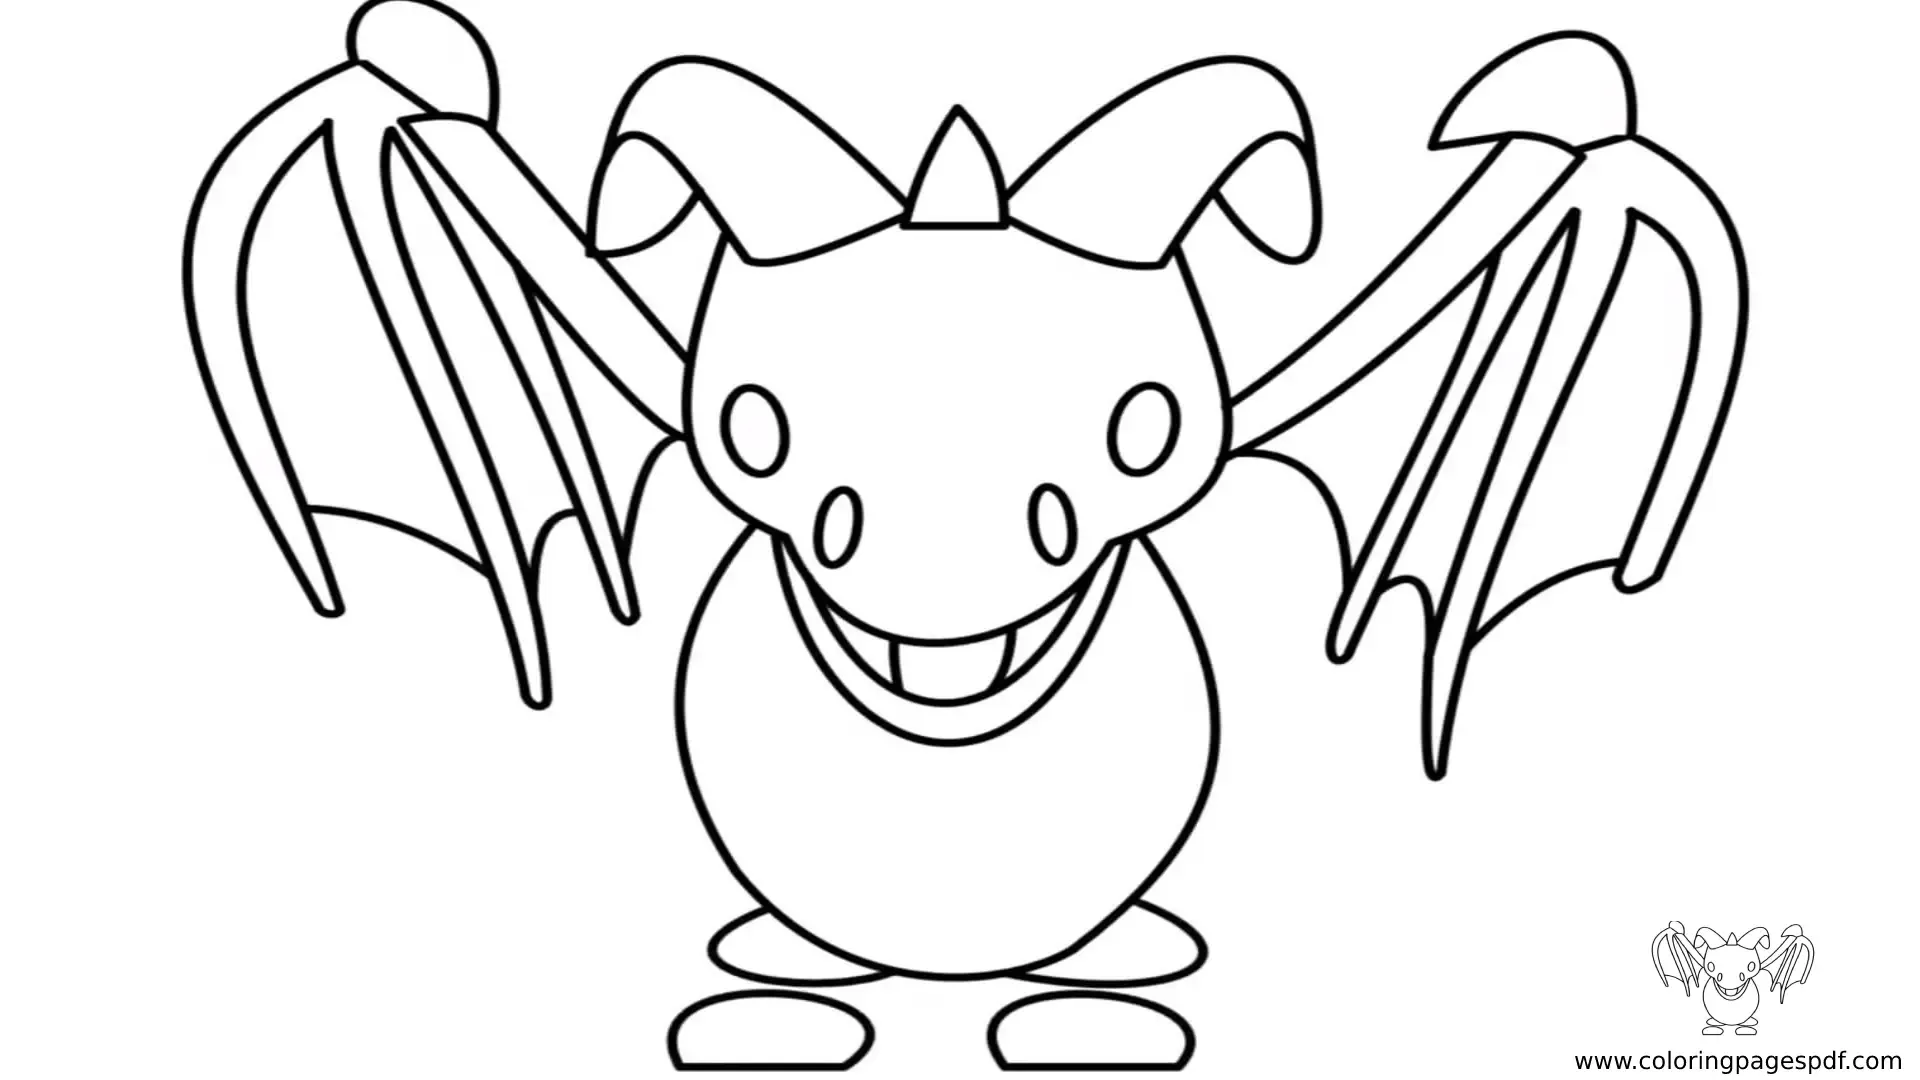 Adopt Me Coloring Pages Frost Dragon